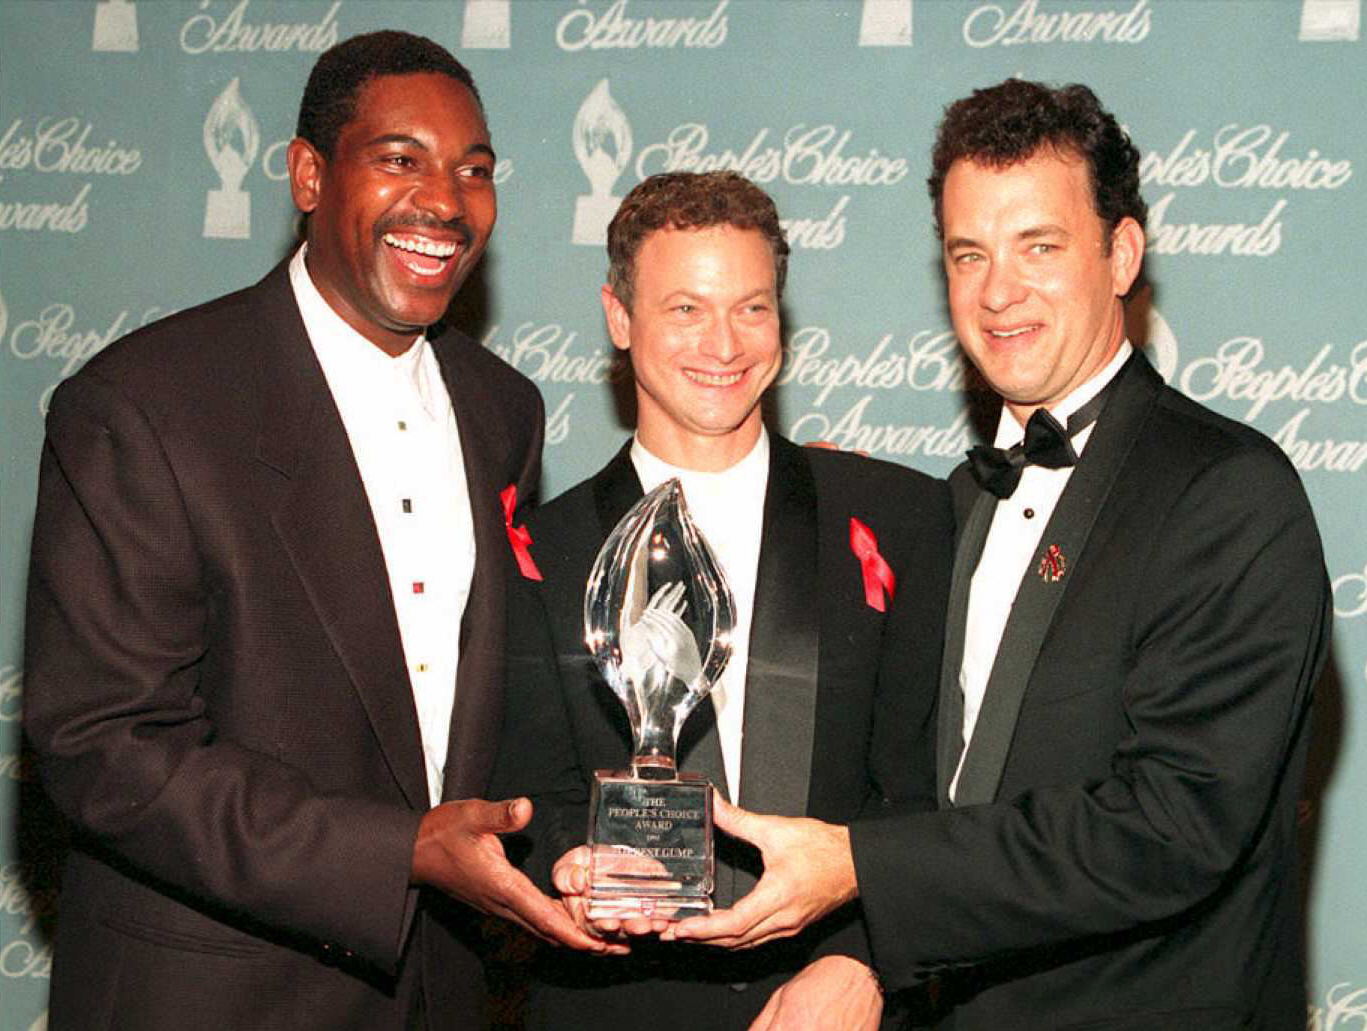 Mykelti Williamson, Gary Sinise, and Tom Hanks from the movie "Forrest Gump" pose with the award they won during the 21st Annual People's Choice Awards at Universal City Studios | Source: Getty Images